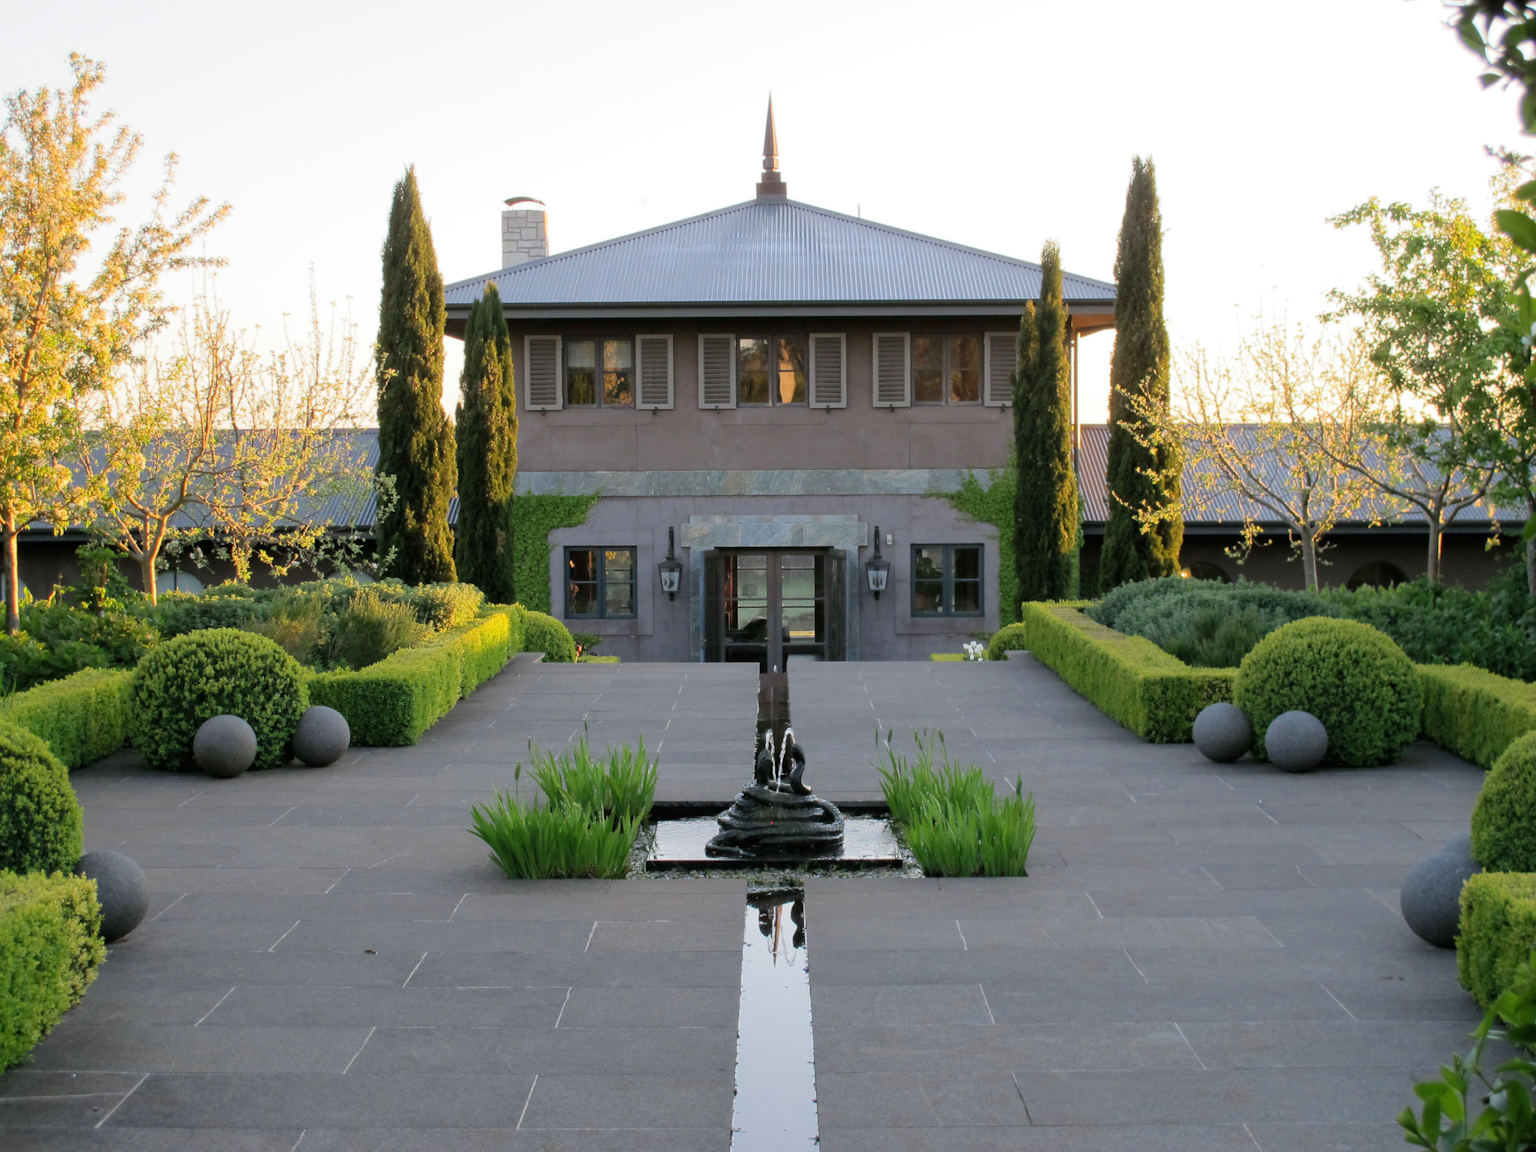 Paul Bangay's residence and manicured gardens at Stonefields using Raven granite paving